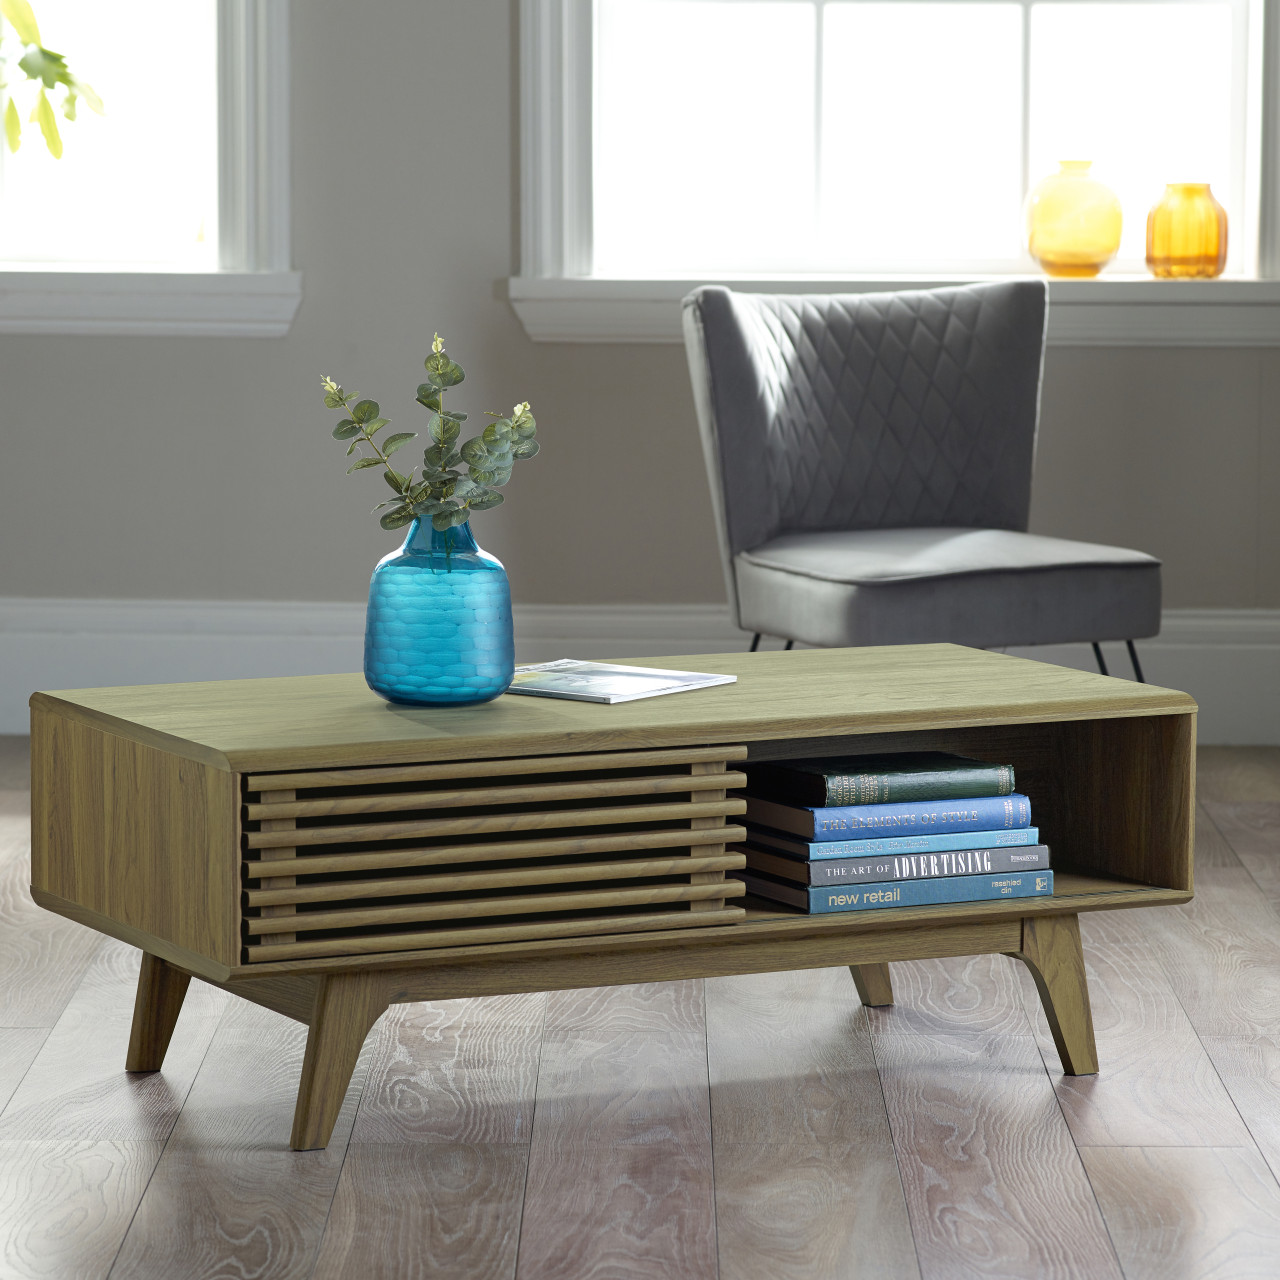 Copen - Wooden Coffee Table with Storage - 120cm | Modern Coffee Tables |  Out & Out